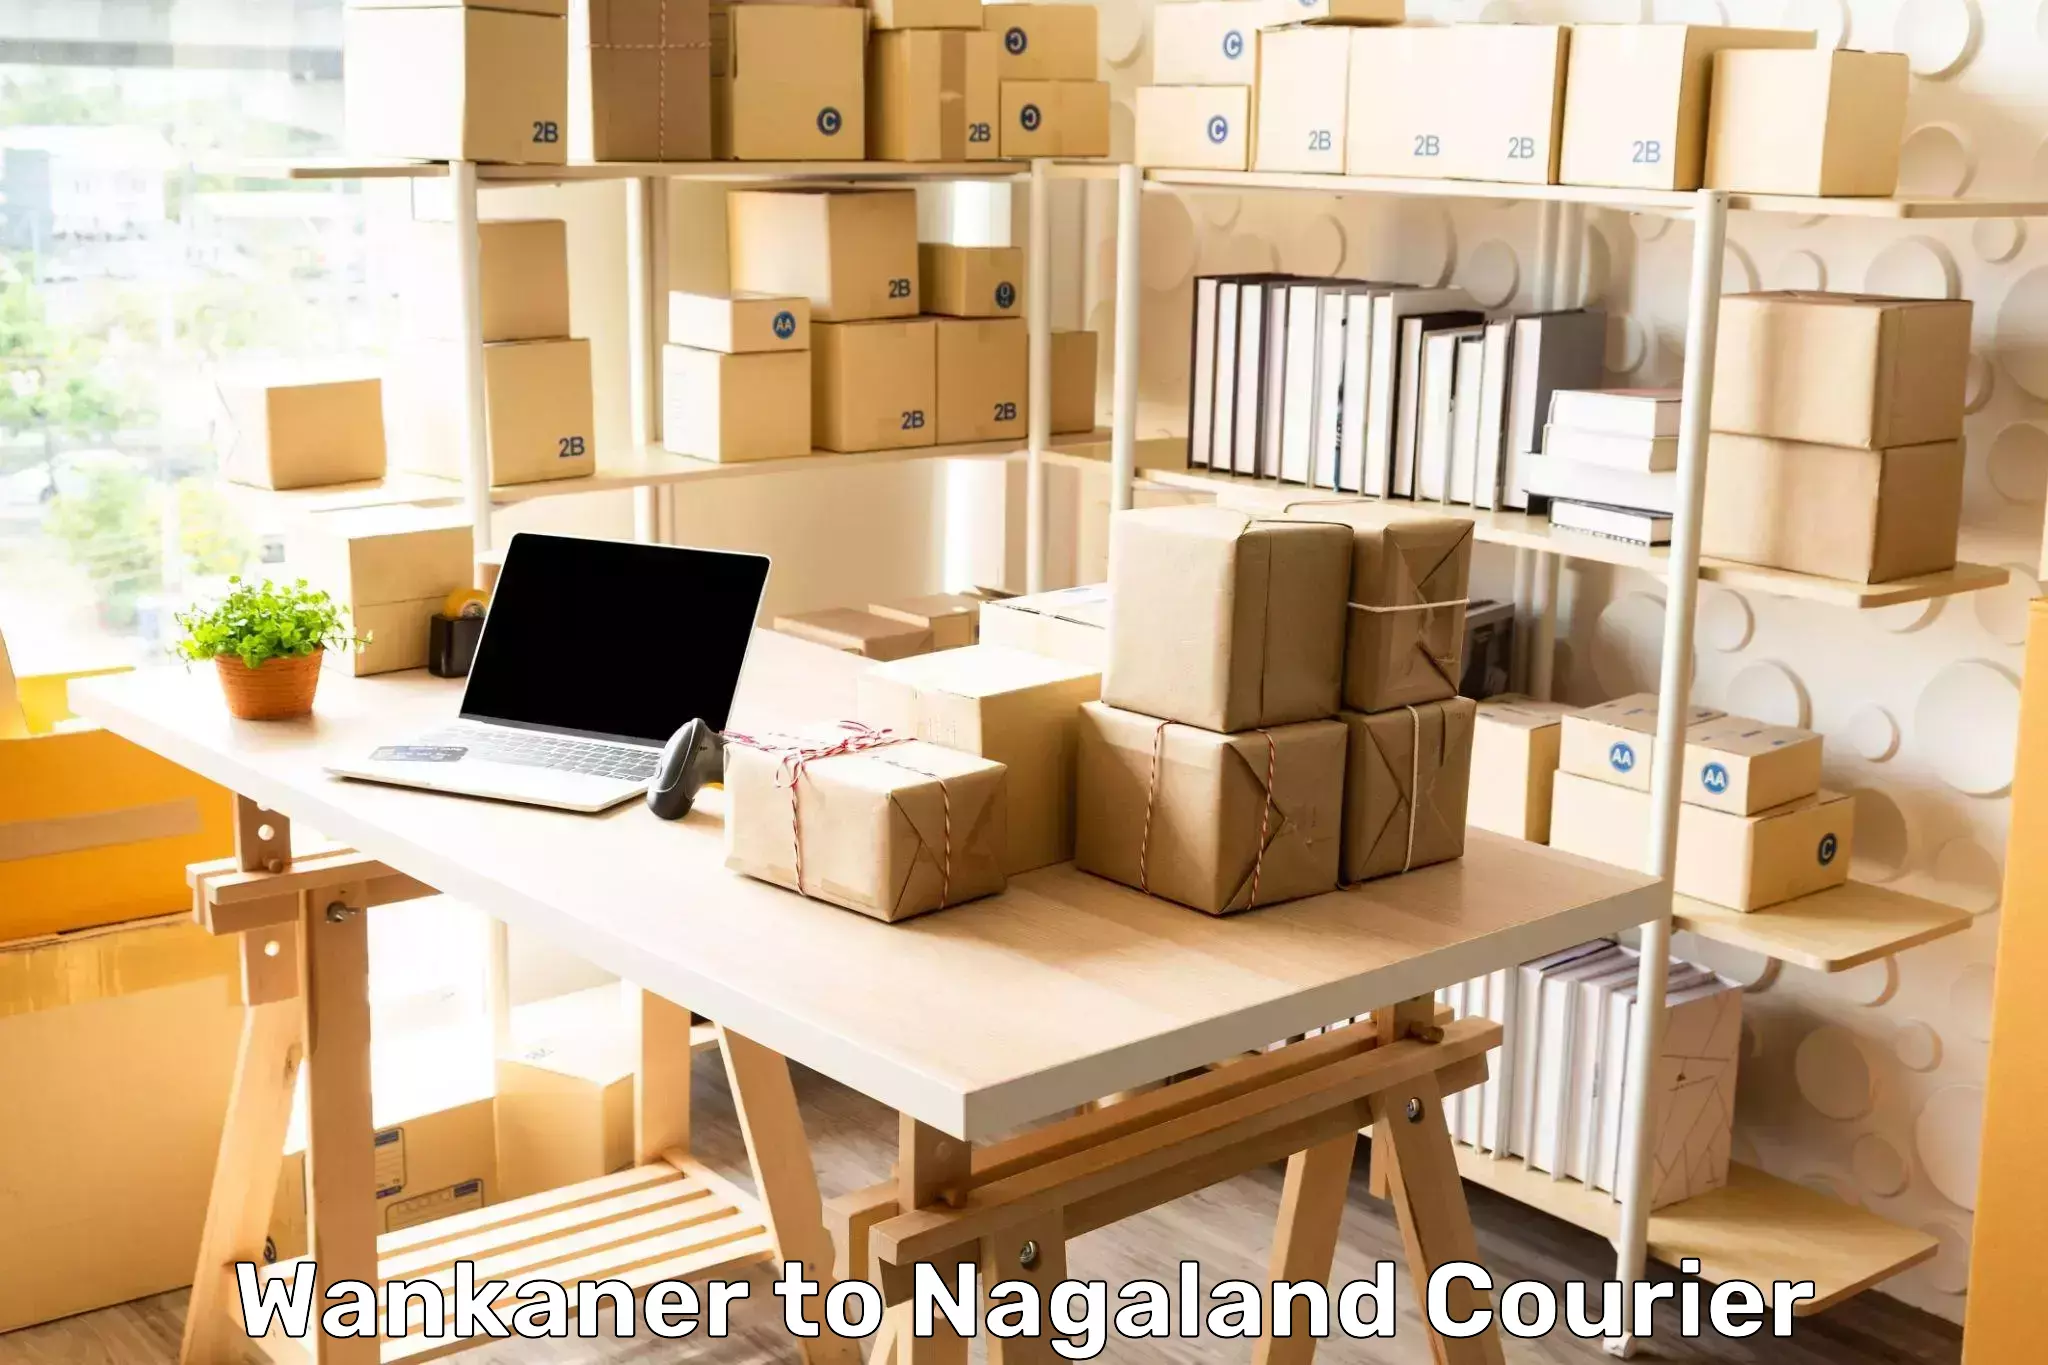 Rural area delivery Wankaner to Nagaland